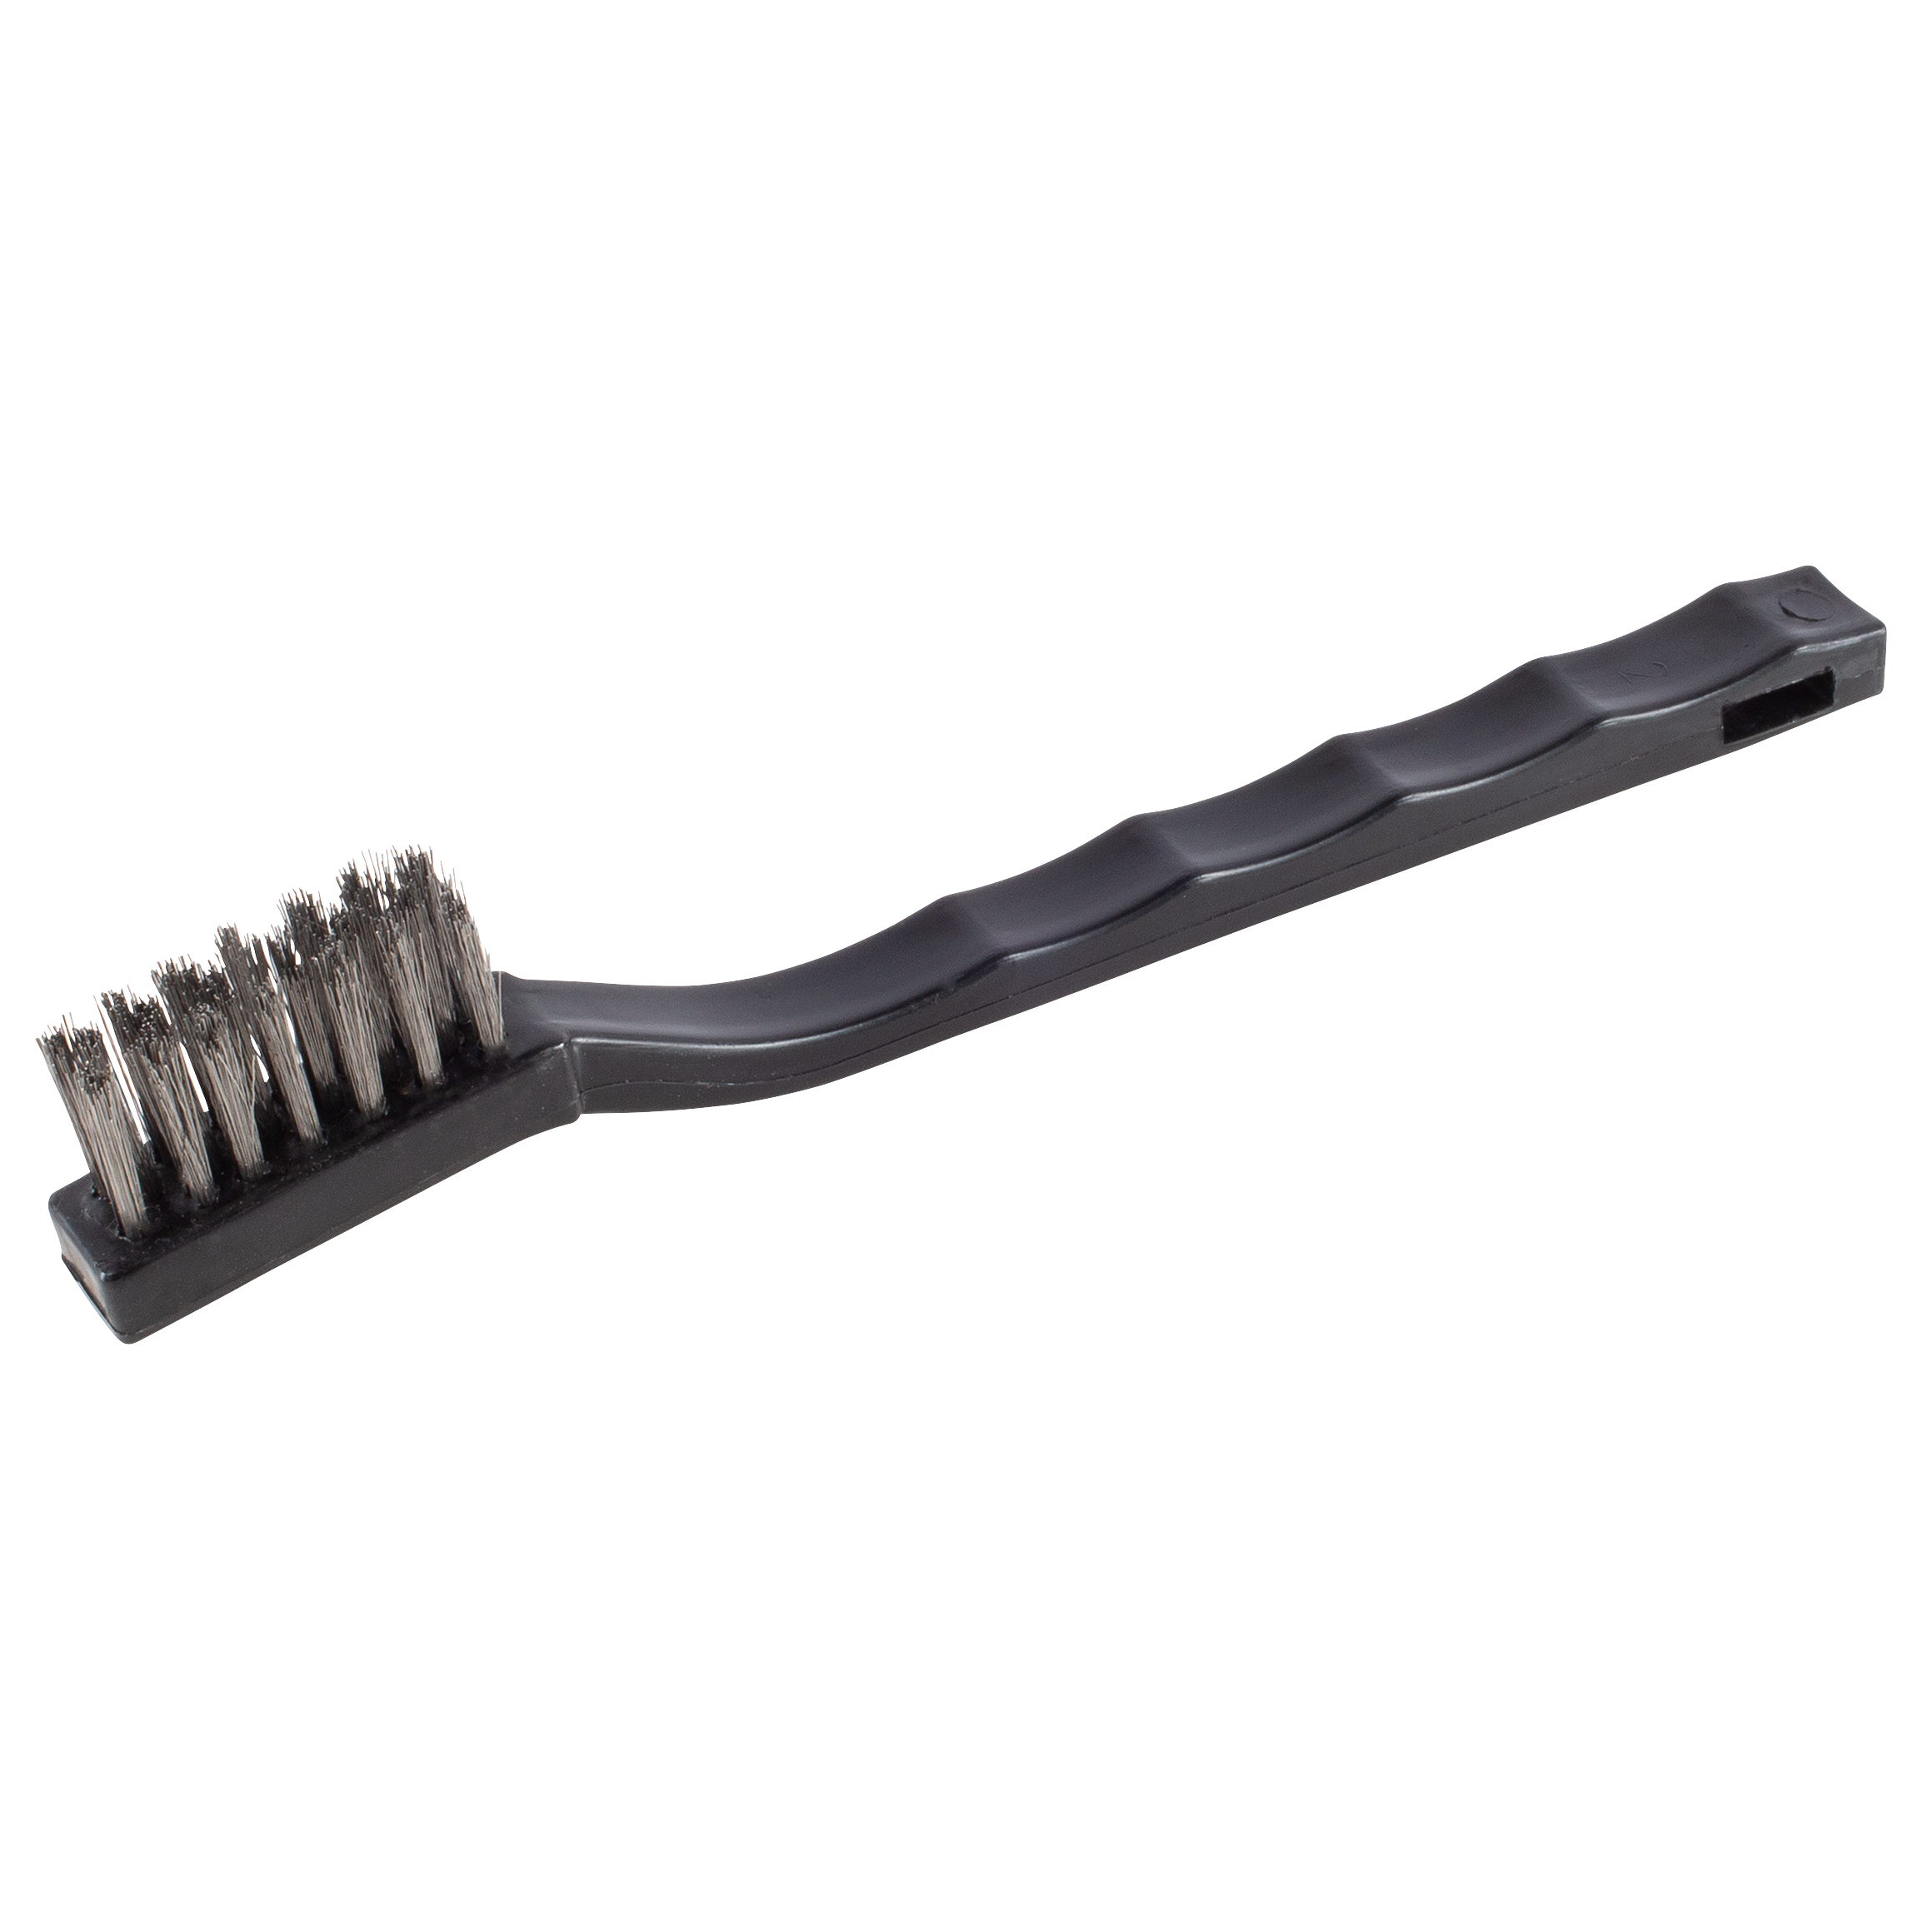 Kennedy 4-ROW STAINLESS STEEL WIRE SCRATCH BRUSH